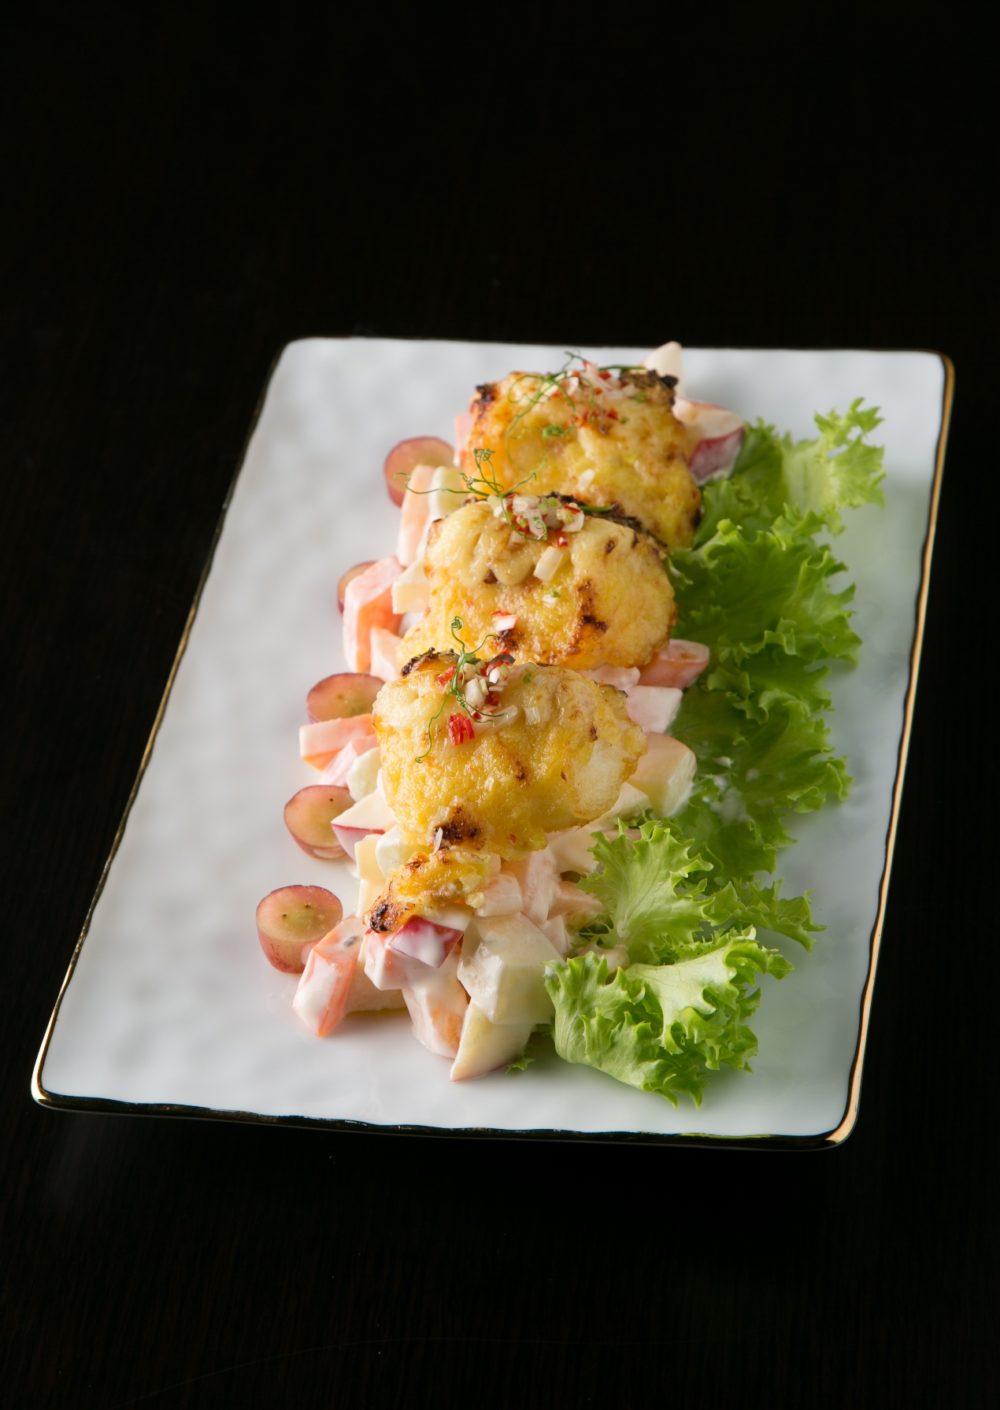 Oven baked Marinated Cod fish Fillet with Fragrant Golden Garlic (2)